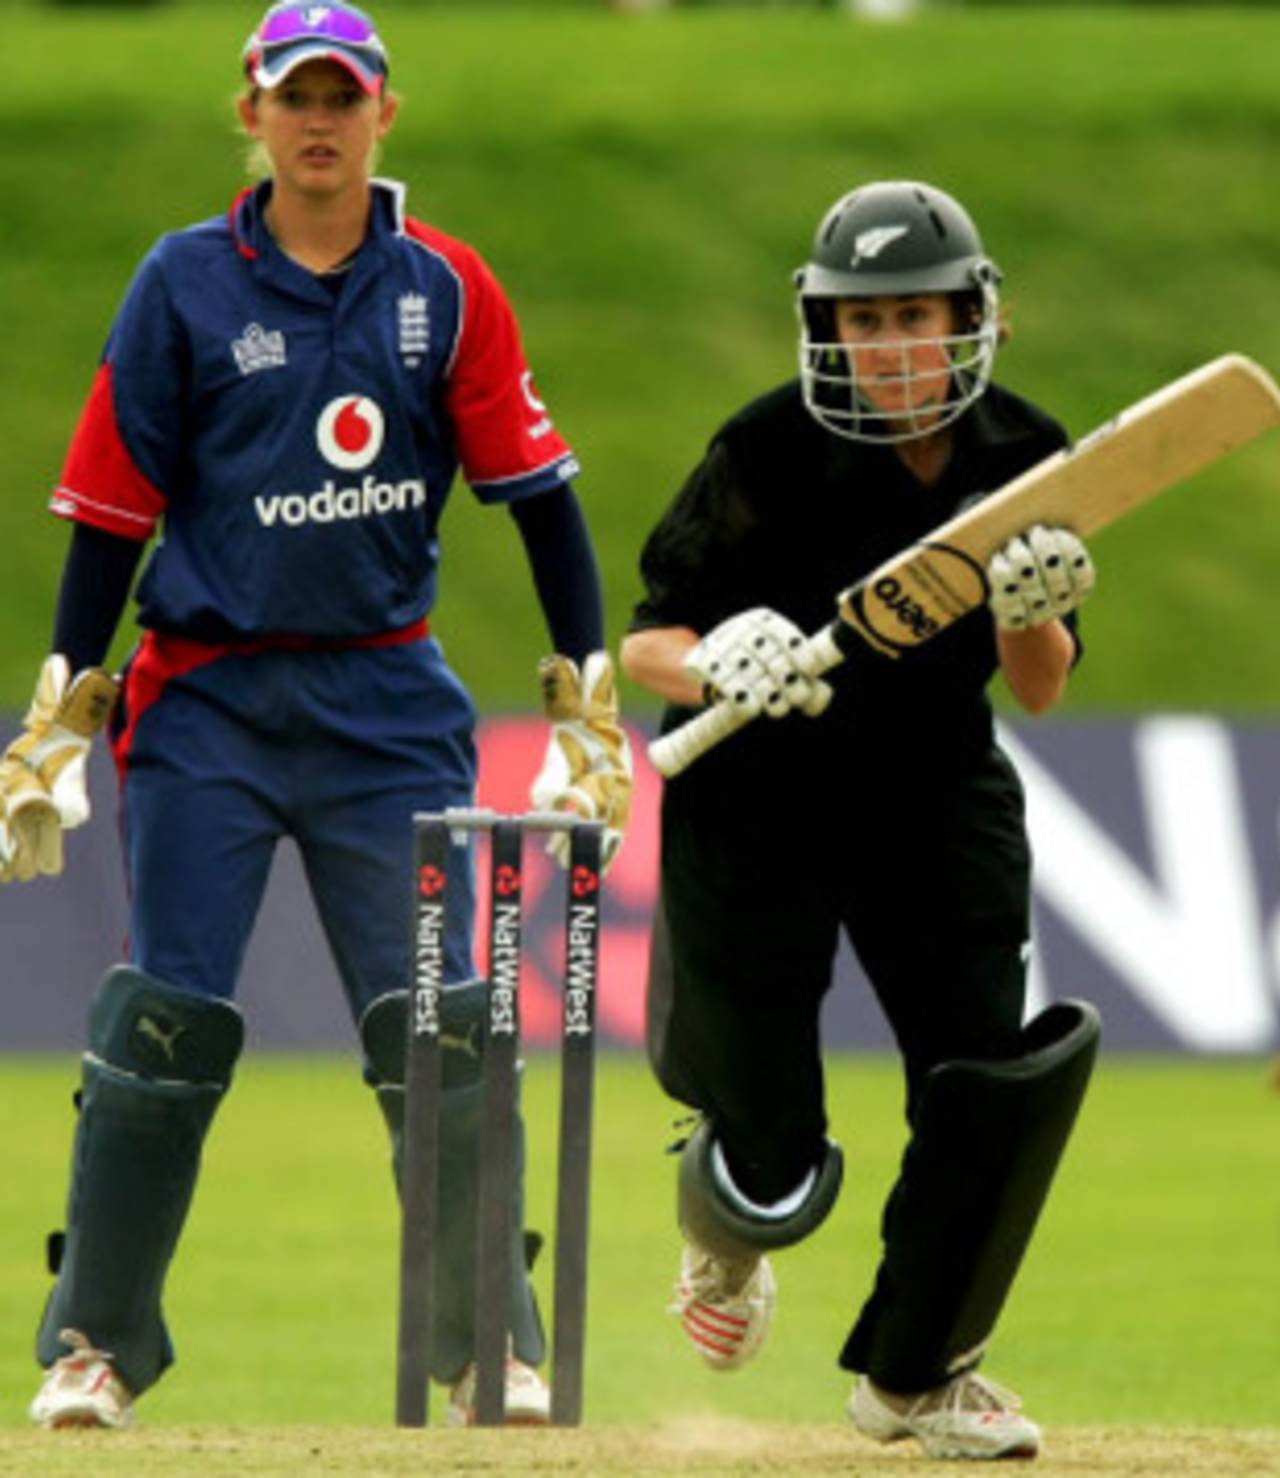 Rachel Candy sets out for a run as Sarah Taylor looks on, England v New Zealand, 5th women's ODI, Blackpool, August 27, 2007